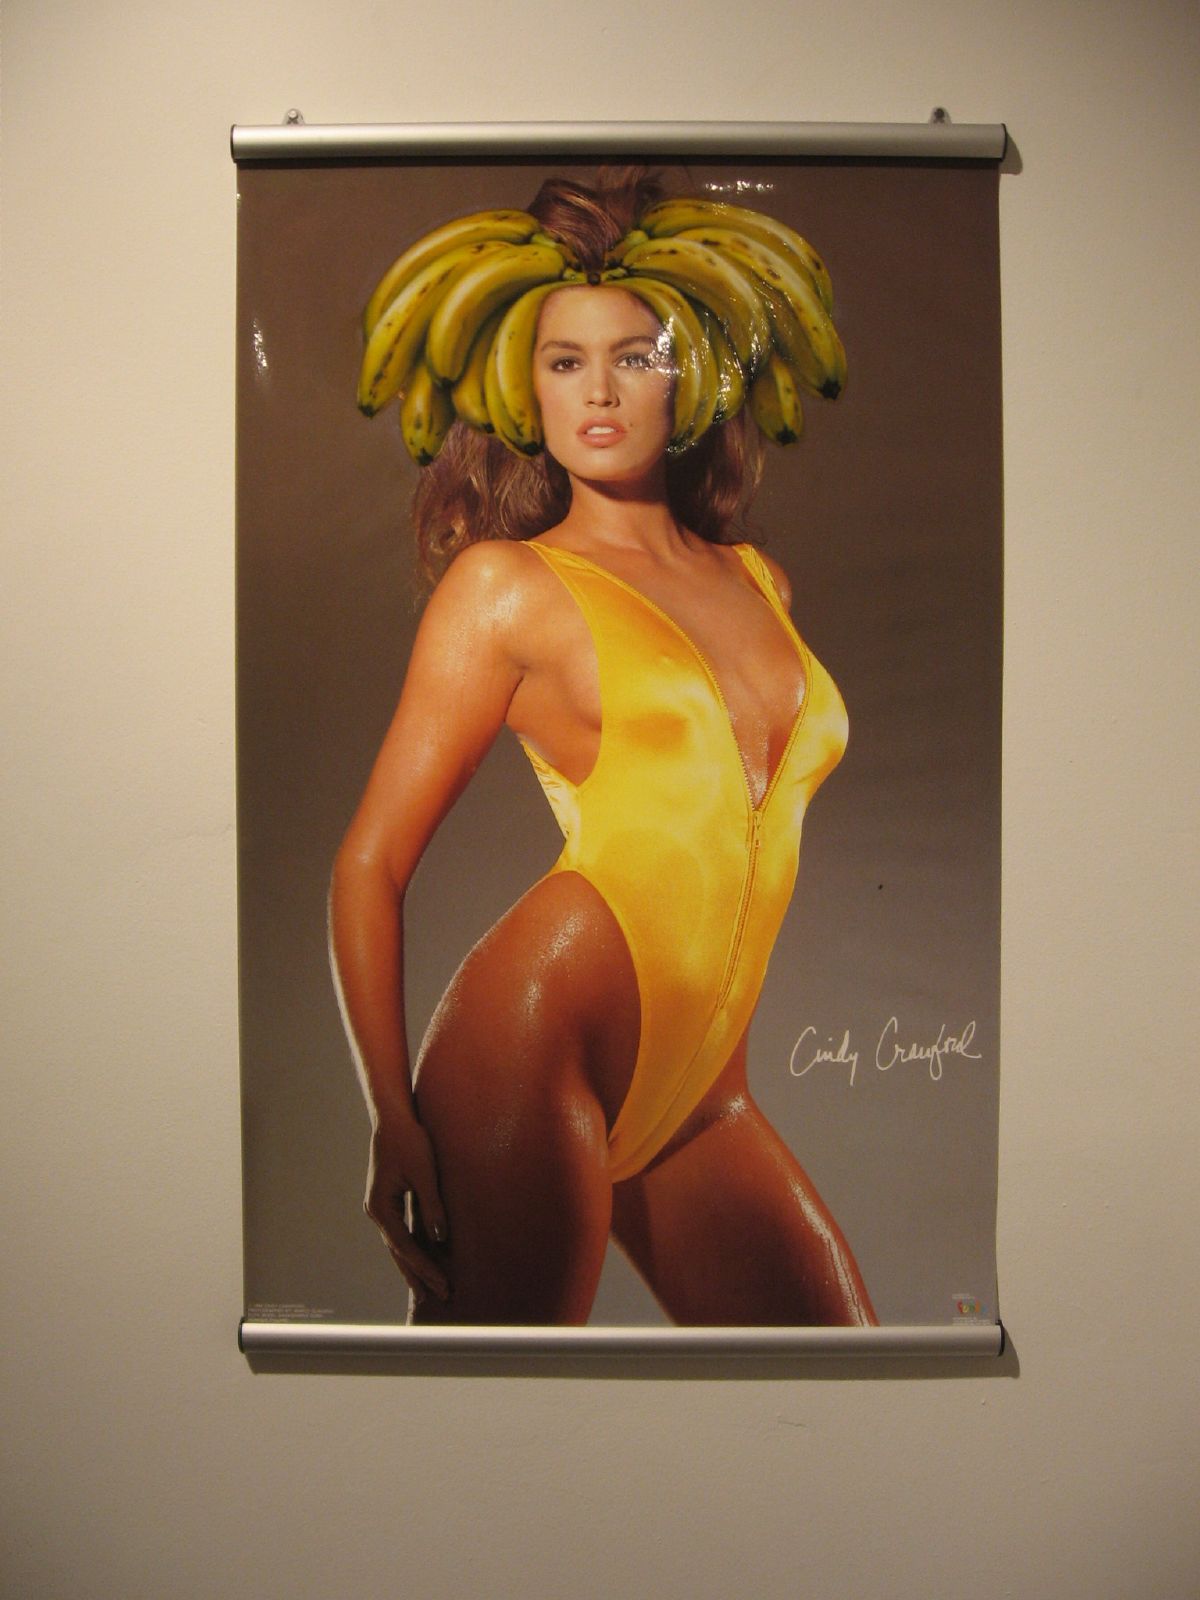 an art installation depicts a woman in a body suit and bananas on her head